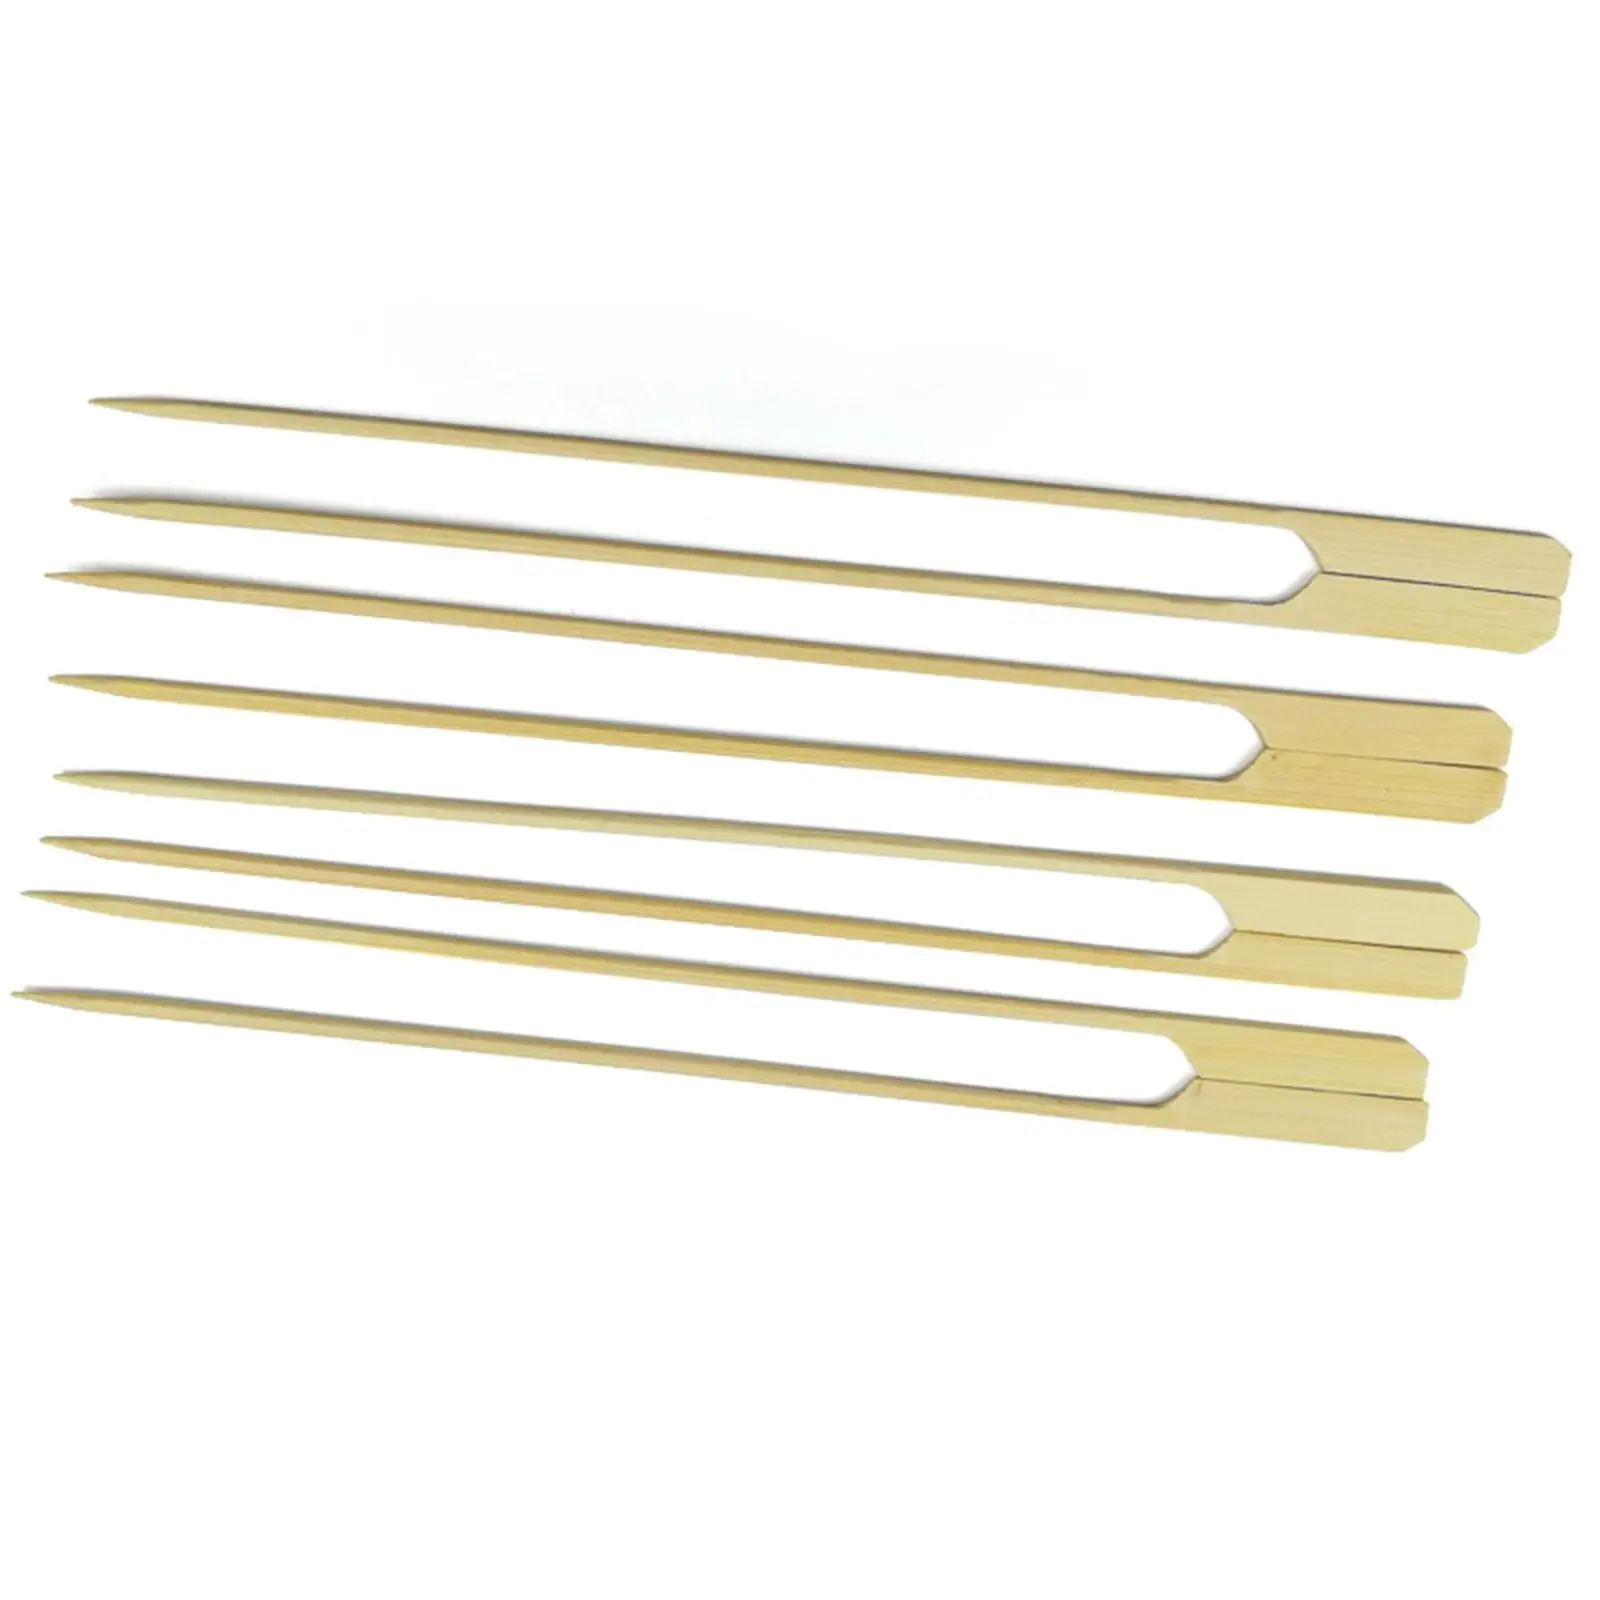 100x Bamboo Skewers BBQ Durable Smooth Portable Wood Grilling Skewers for Camping Sausage Fruit Kababs Barbeque Snacks Meat